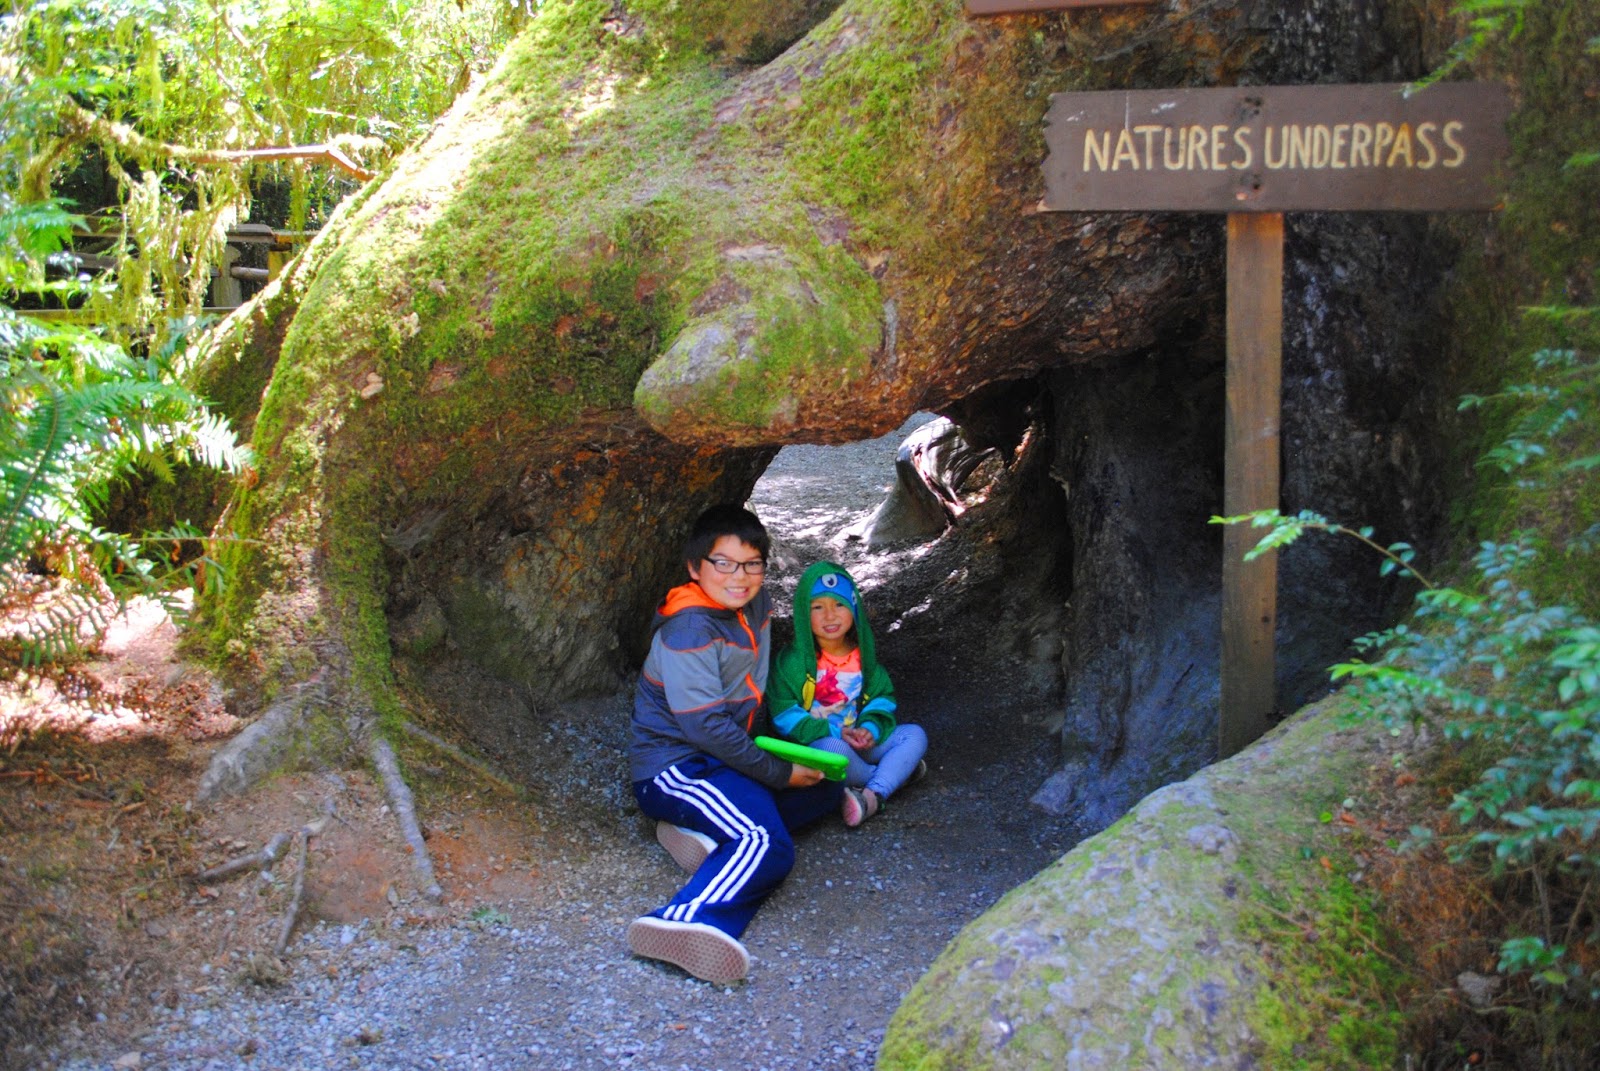 TREES OF MYSTERY - What to do in Southern Oregon - Things to do - Norhtern California - Camping - Day TRip - Kid-Friendly - Beaches